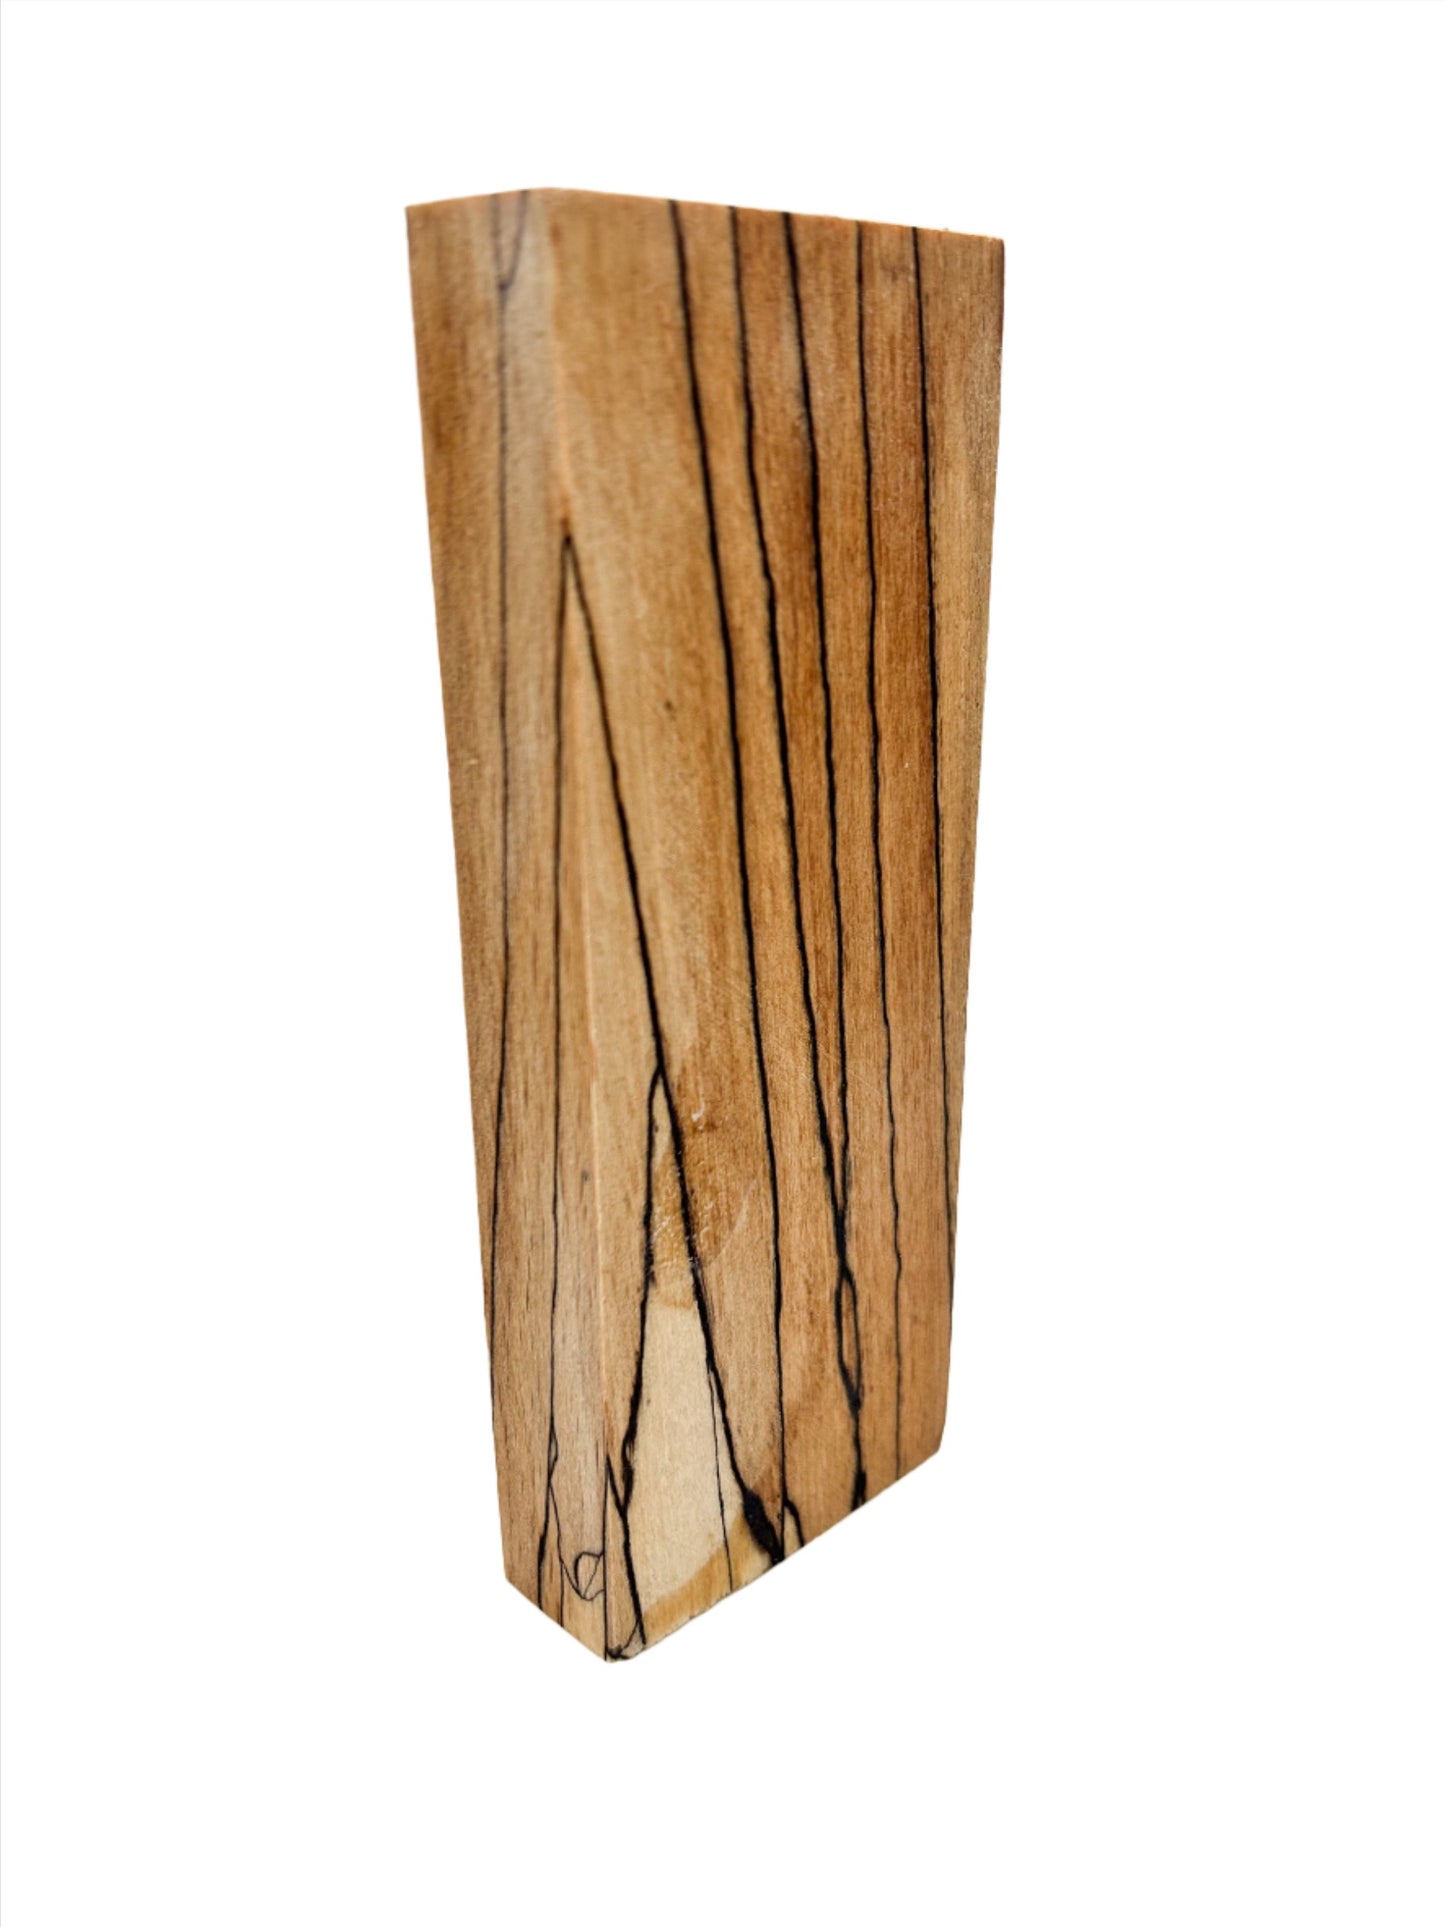 Spalted Beech Wood Knife Scale / Craft Blank | Fully Stabilised | 166x63x23 | Wooden Knife Handle